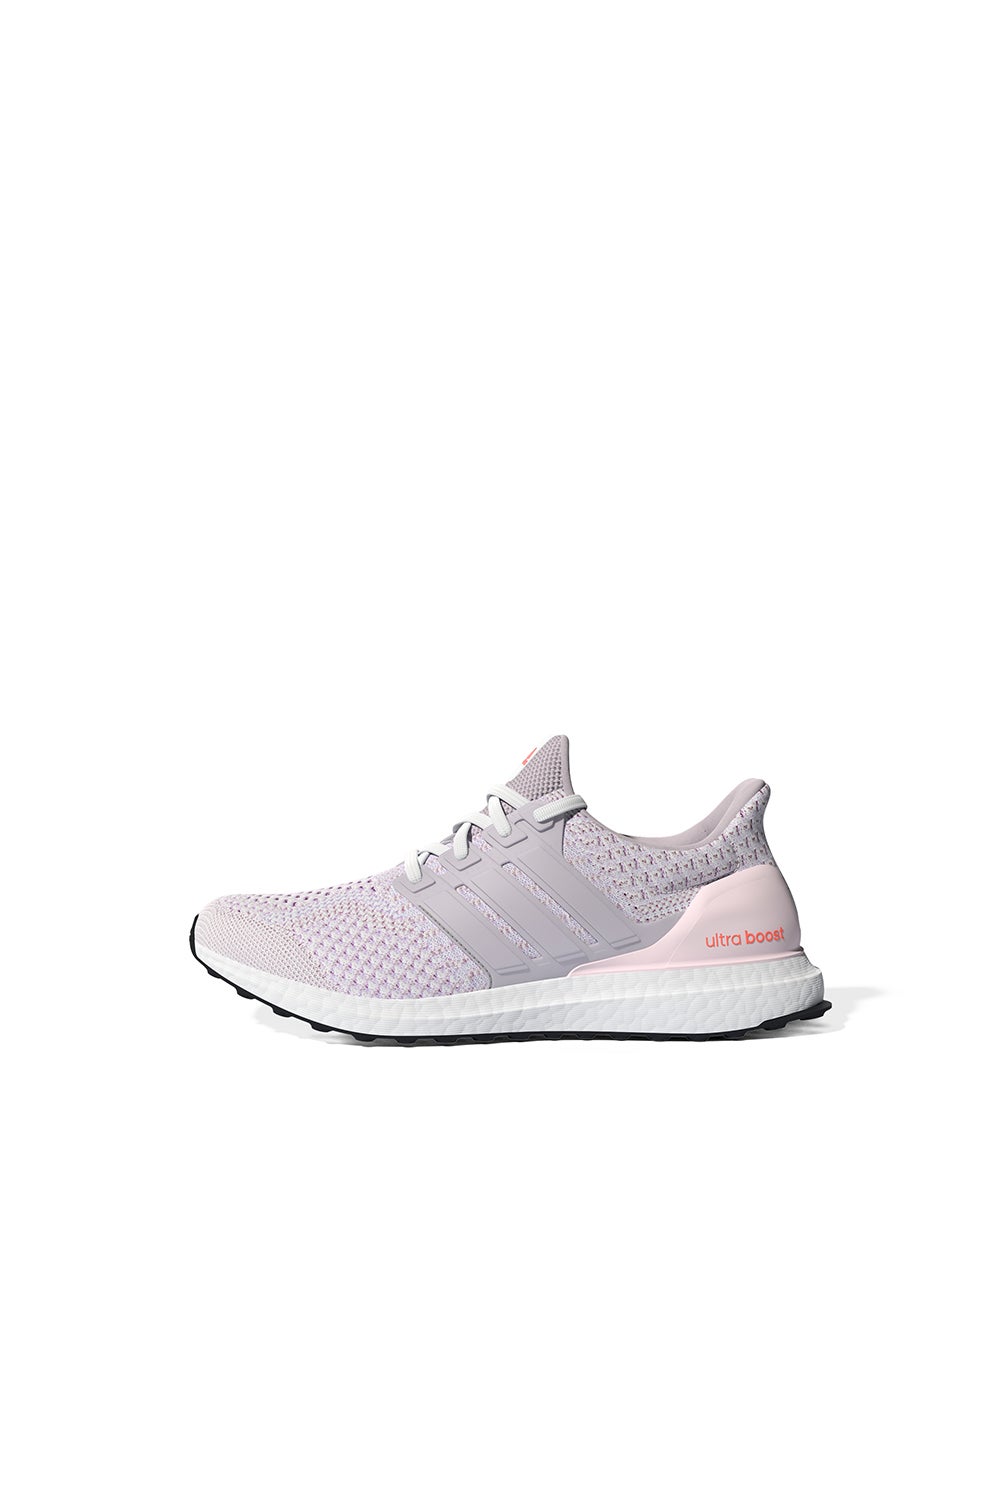 ultra boost 5.0 dna shoes womens